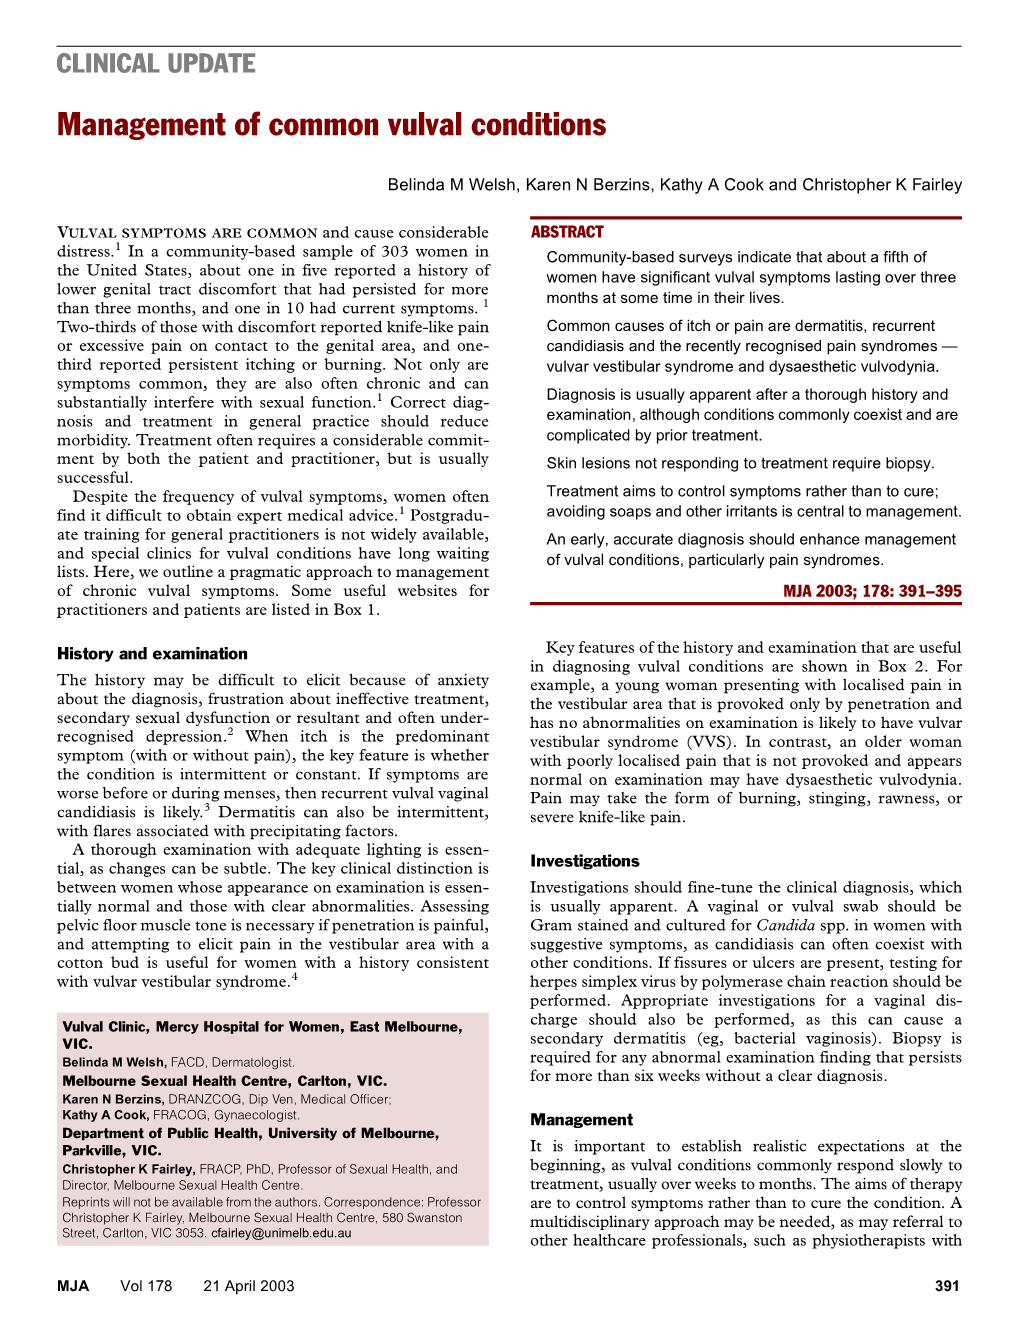 CLINICAL UPDATE CLINICAL UPDATE Management of Common Vulval Conditions